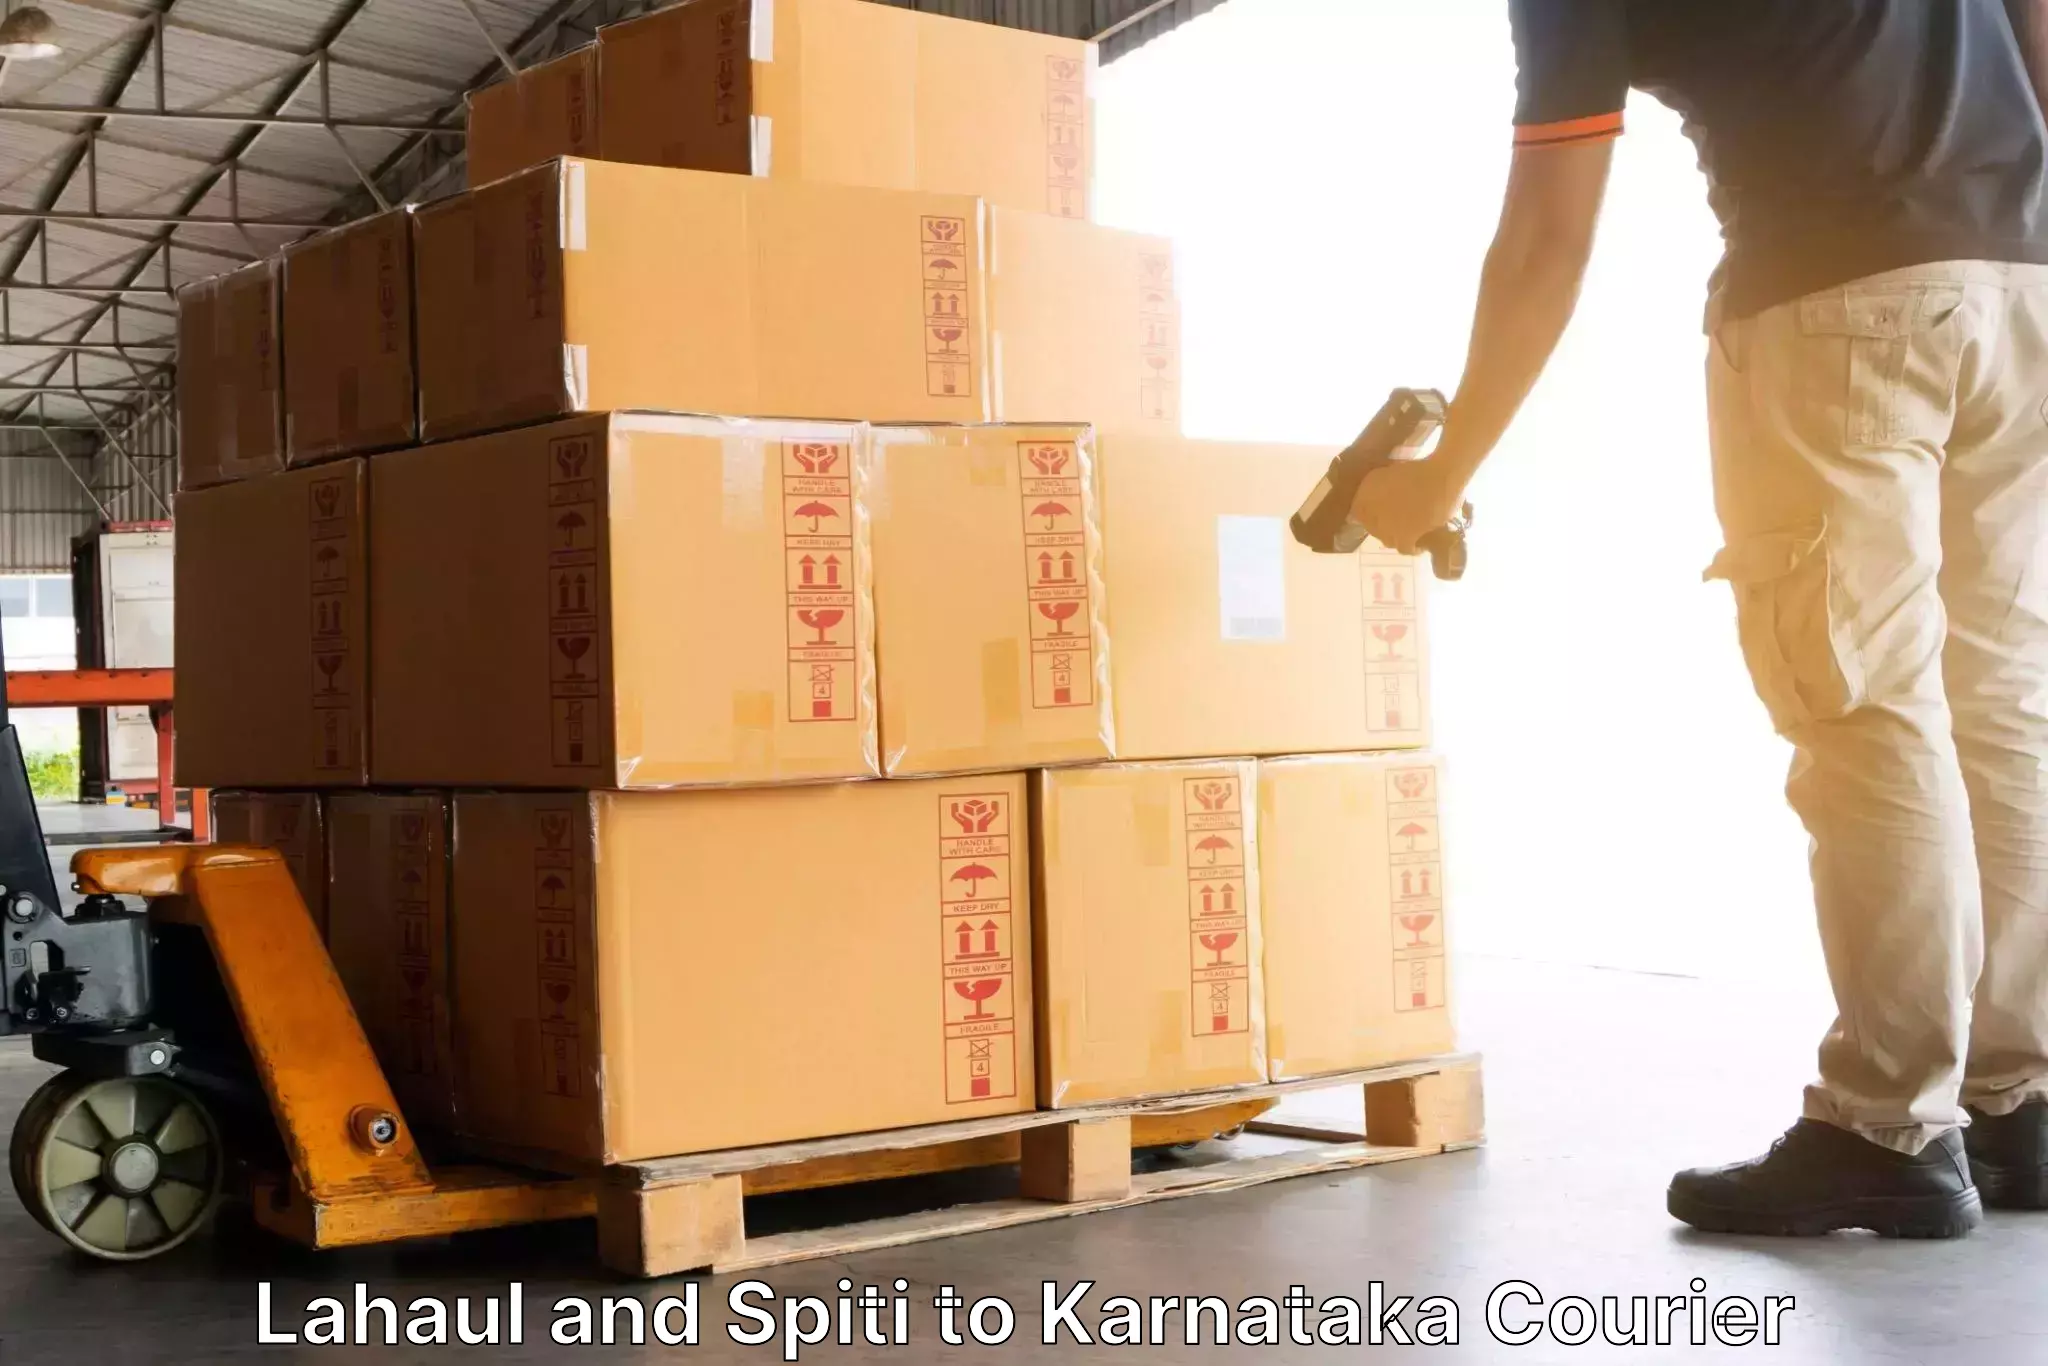 Track and trace shipping in Lahaul and Spiti to Karnataka